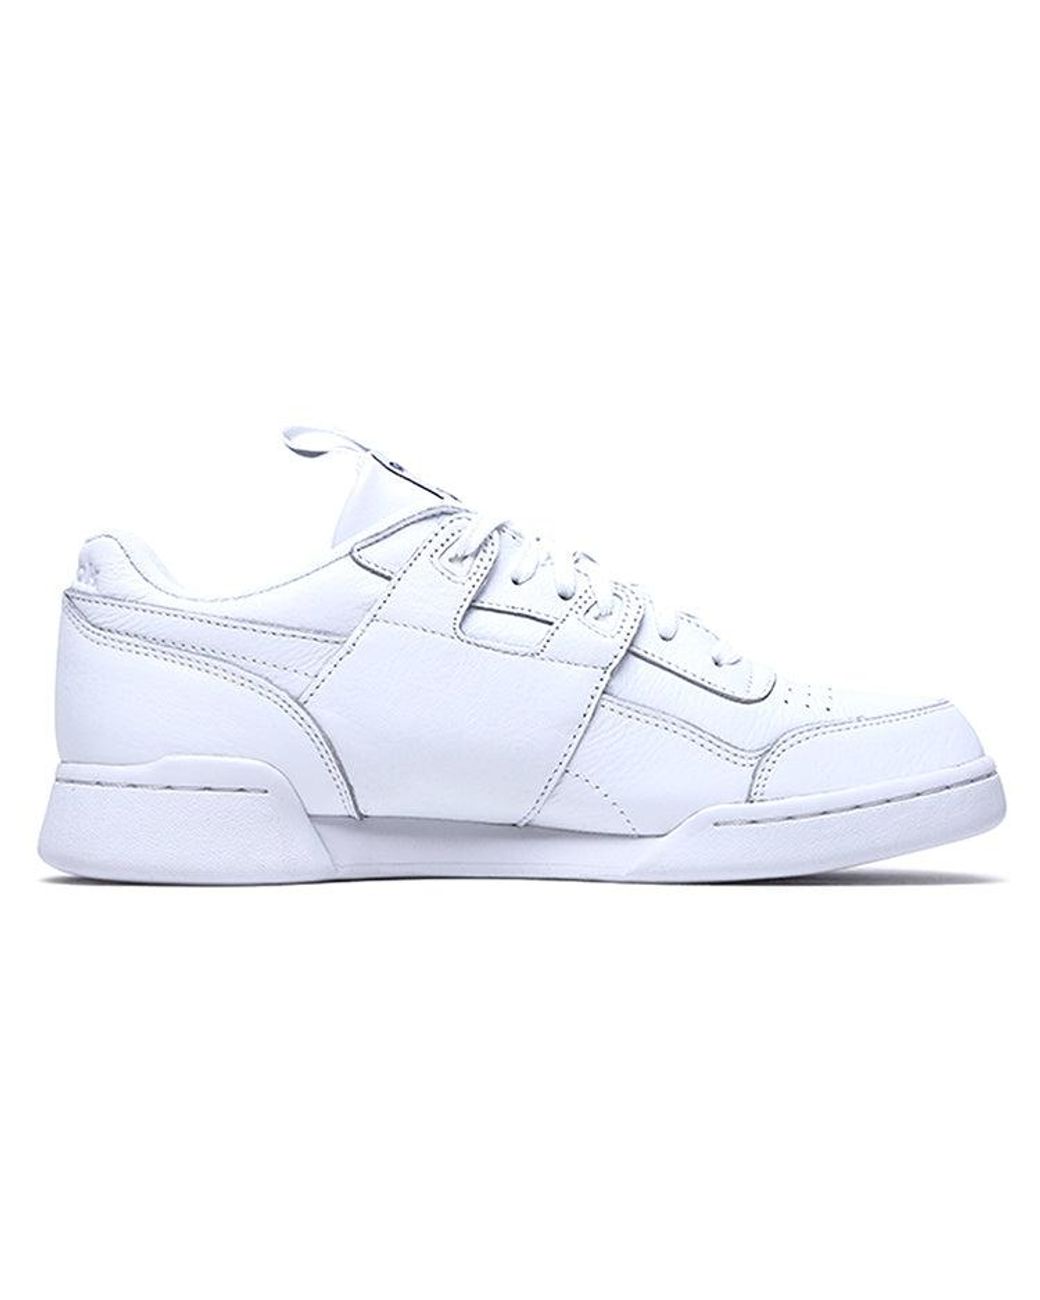 Reebok Workout Skate Shoes in White | Lyst